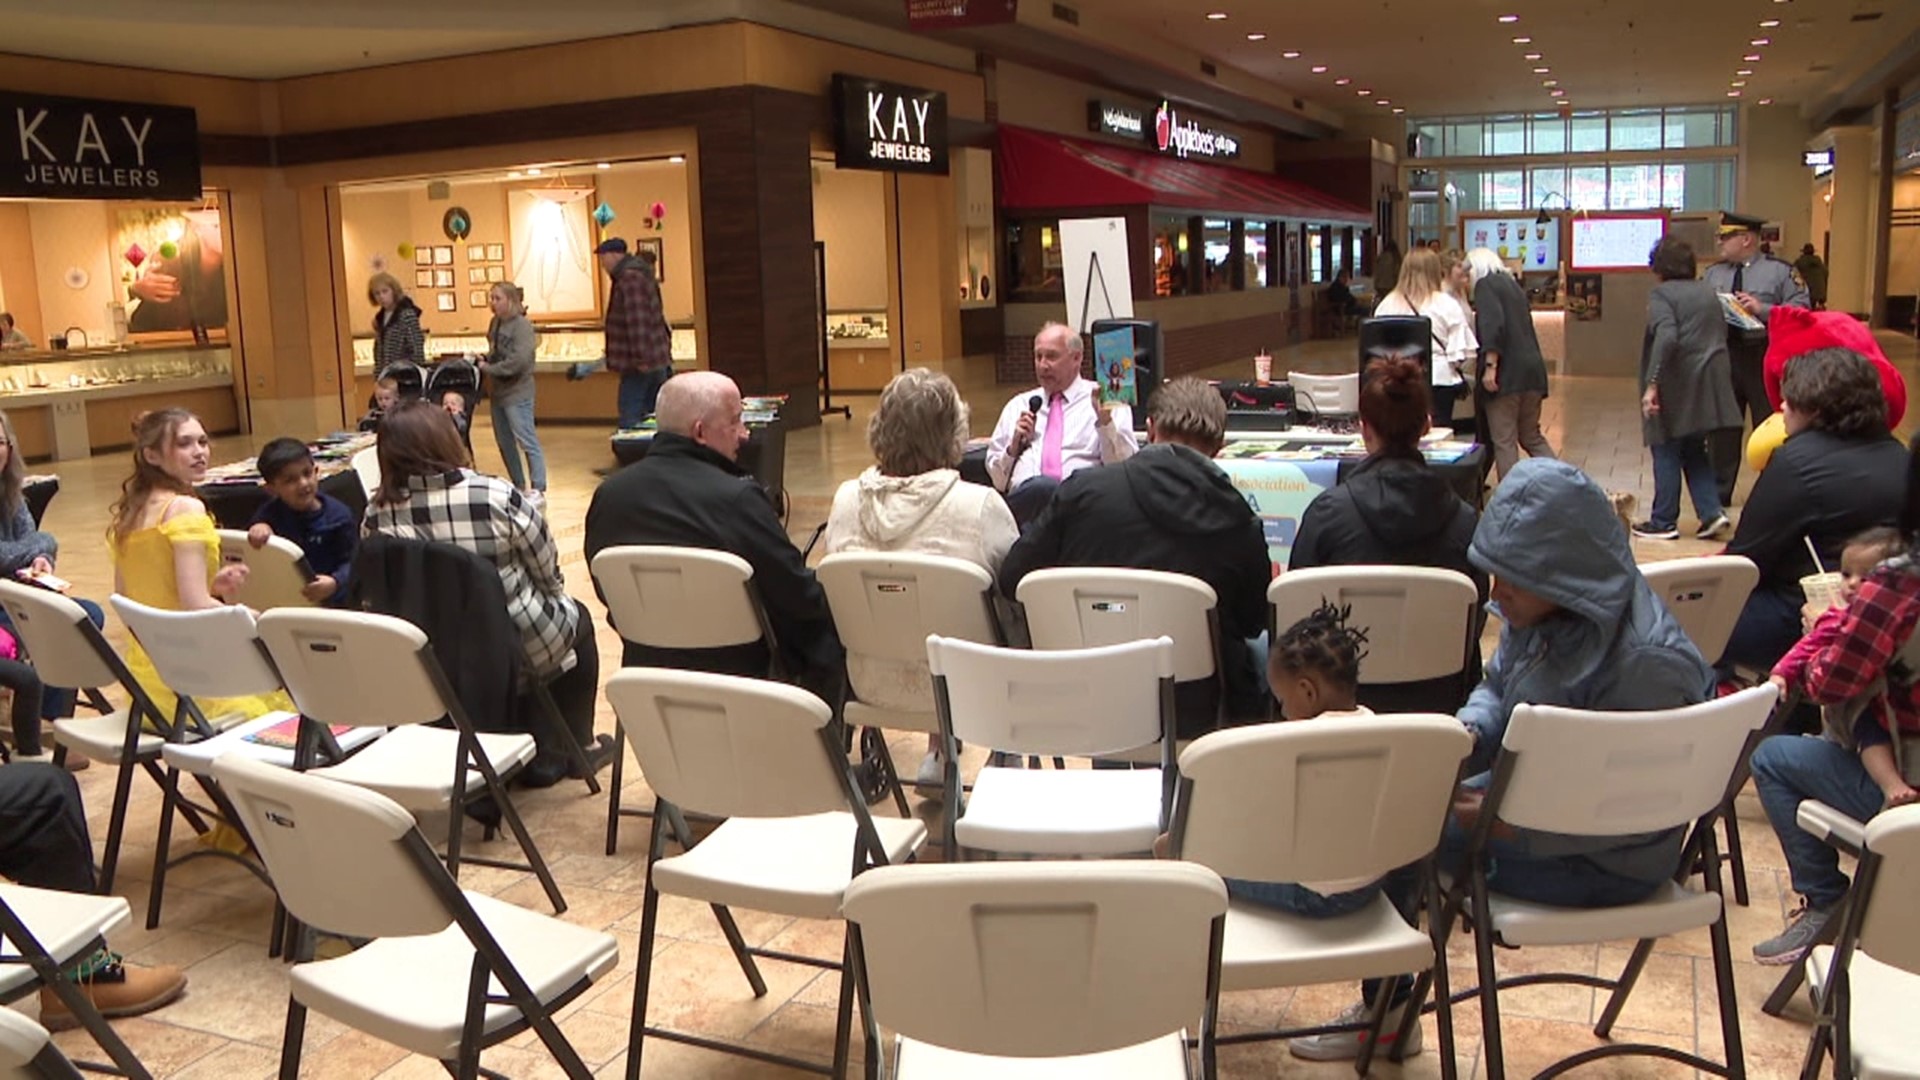 Dozens of kids had the chance to hear stories told by several guest readers at the storytime held at the Viewmont Mall.